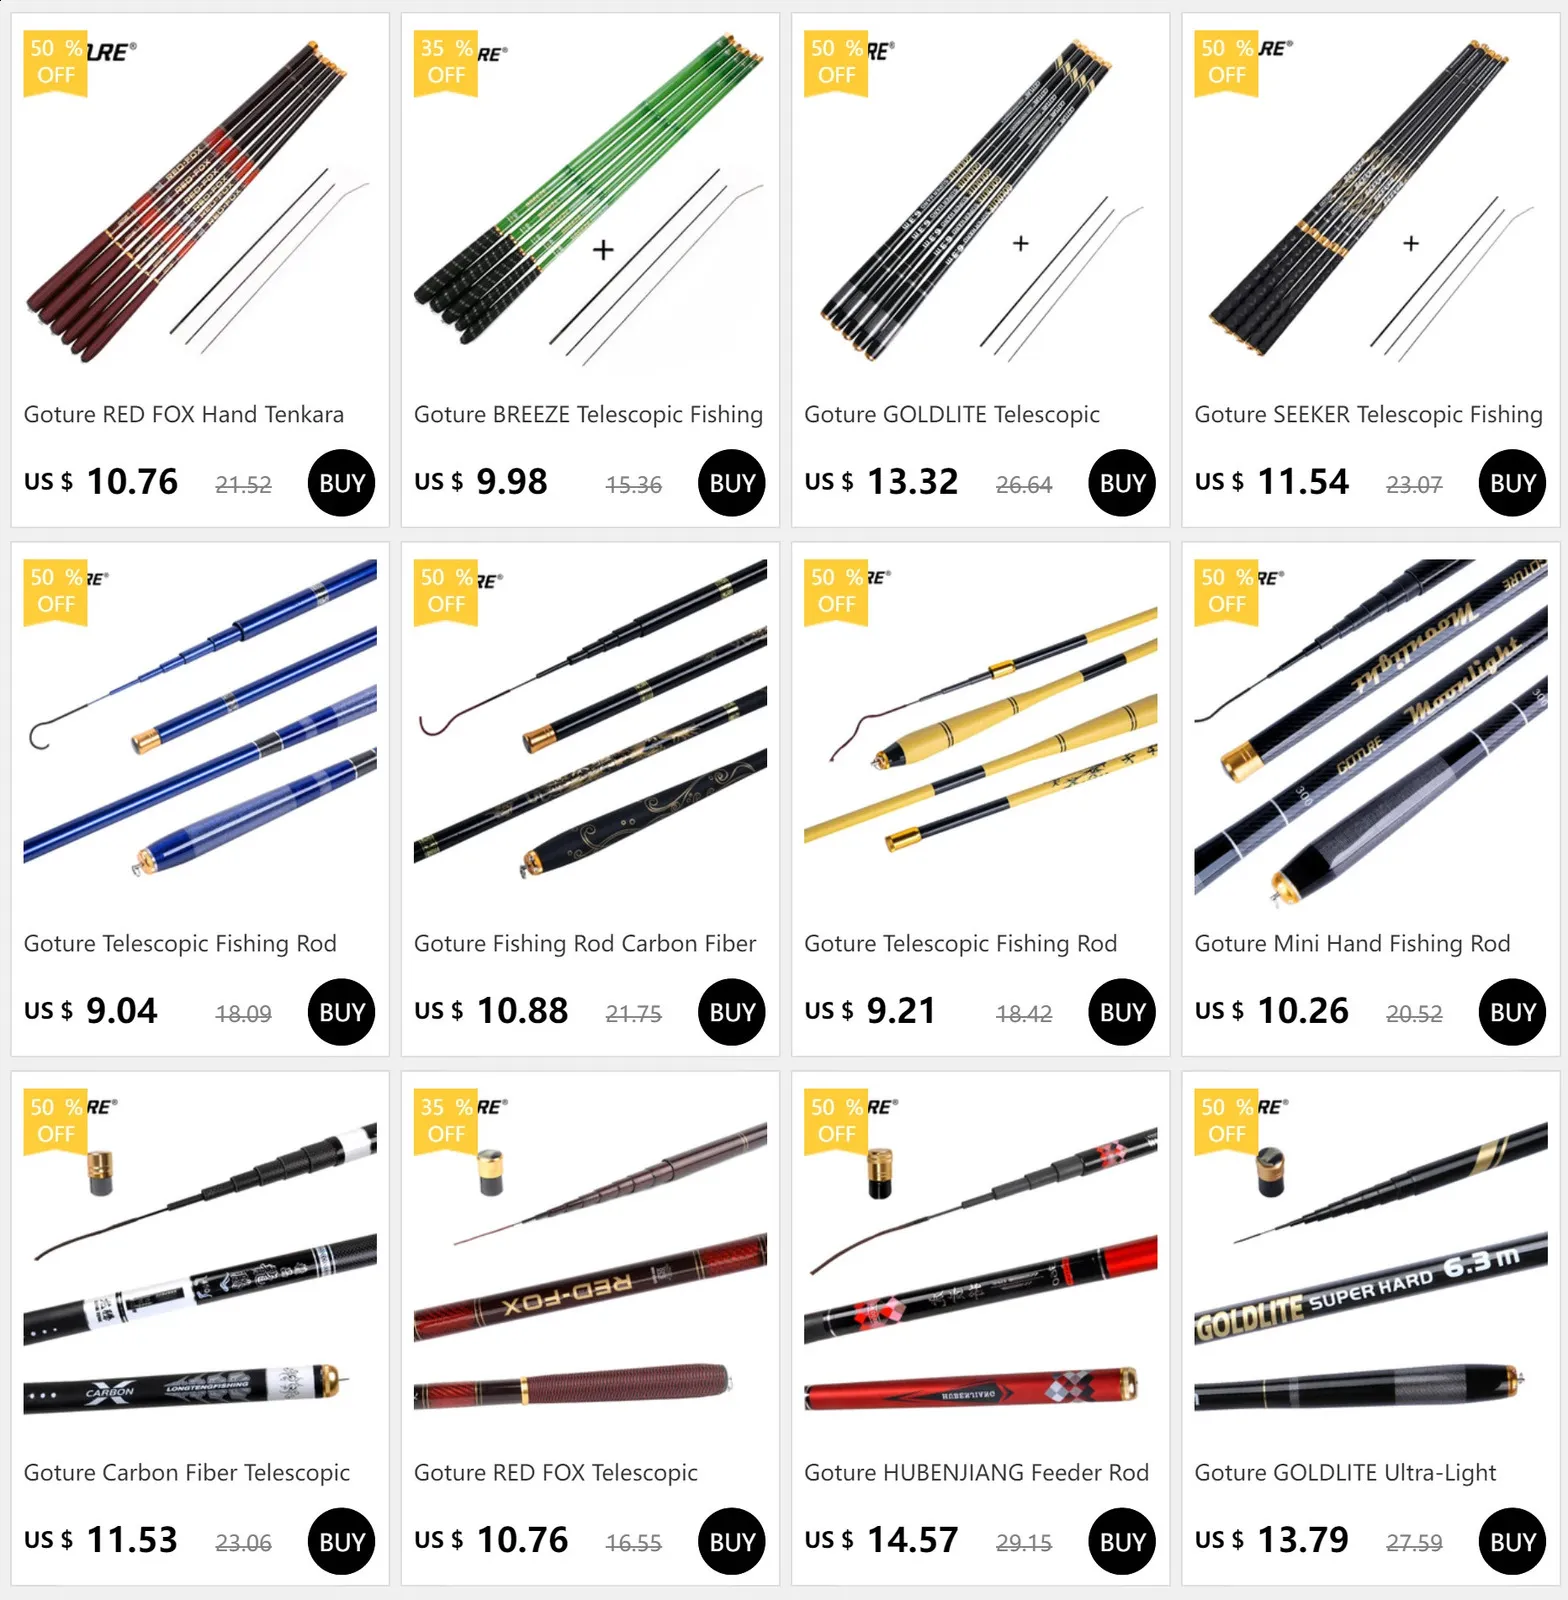 Boat Fishing Rods Goture RED Carp Rod Ultralight Stream Pole Carbon Fiber  Power Hand Taiwan For Freshwater 3.0m 7.2m 231109 From Ren06, $16.13